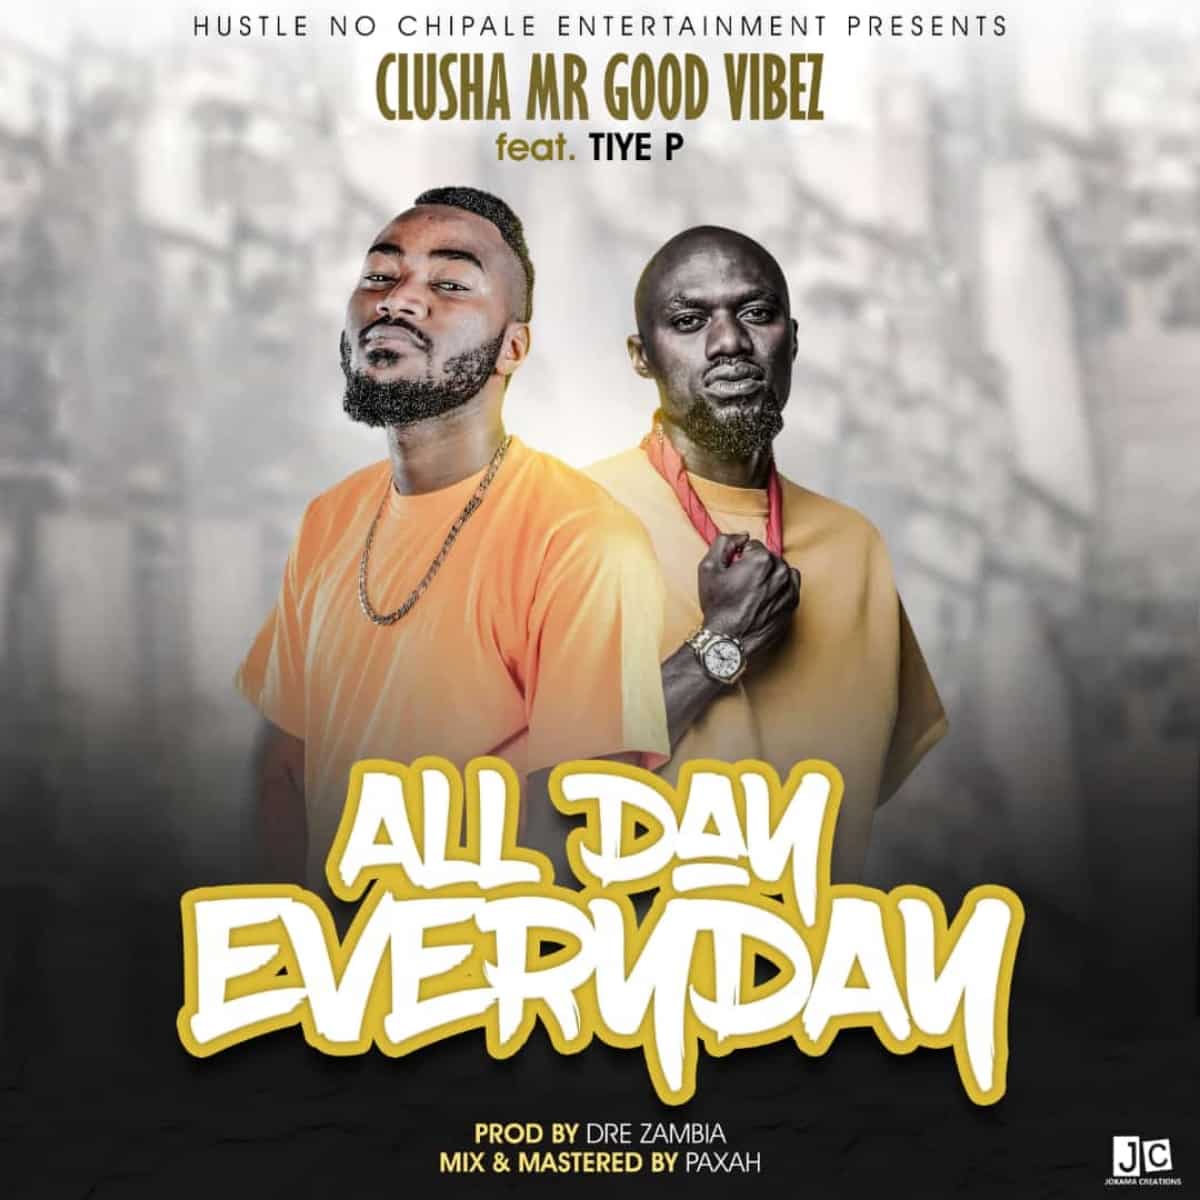 DOWNLOAD: Clusha Ft Tiye P – “All Day Everyday” Mp3